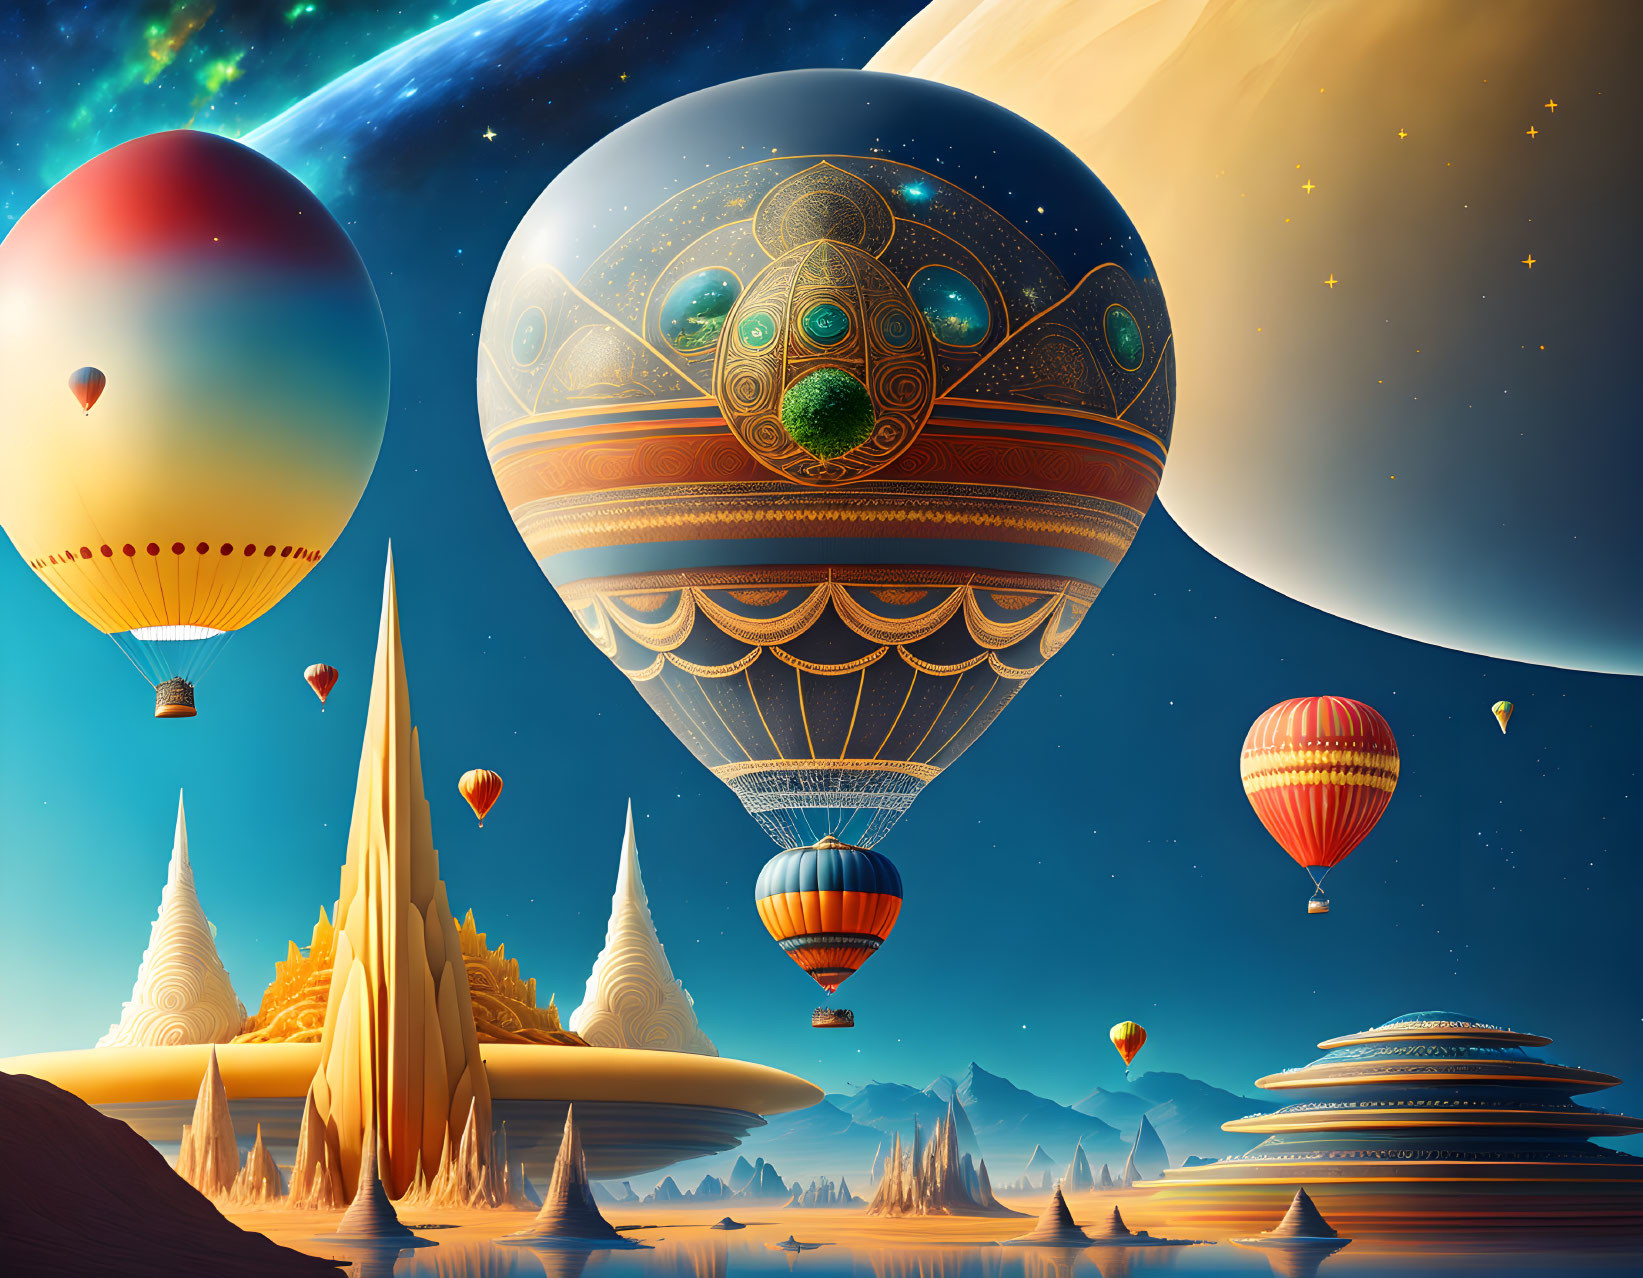 Vibrant hot air balloons over alien landscape with spire-like structures